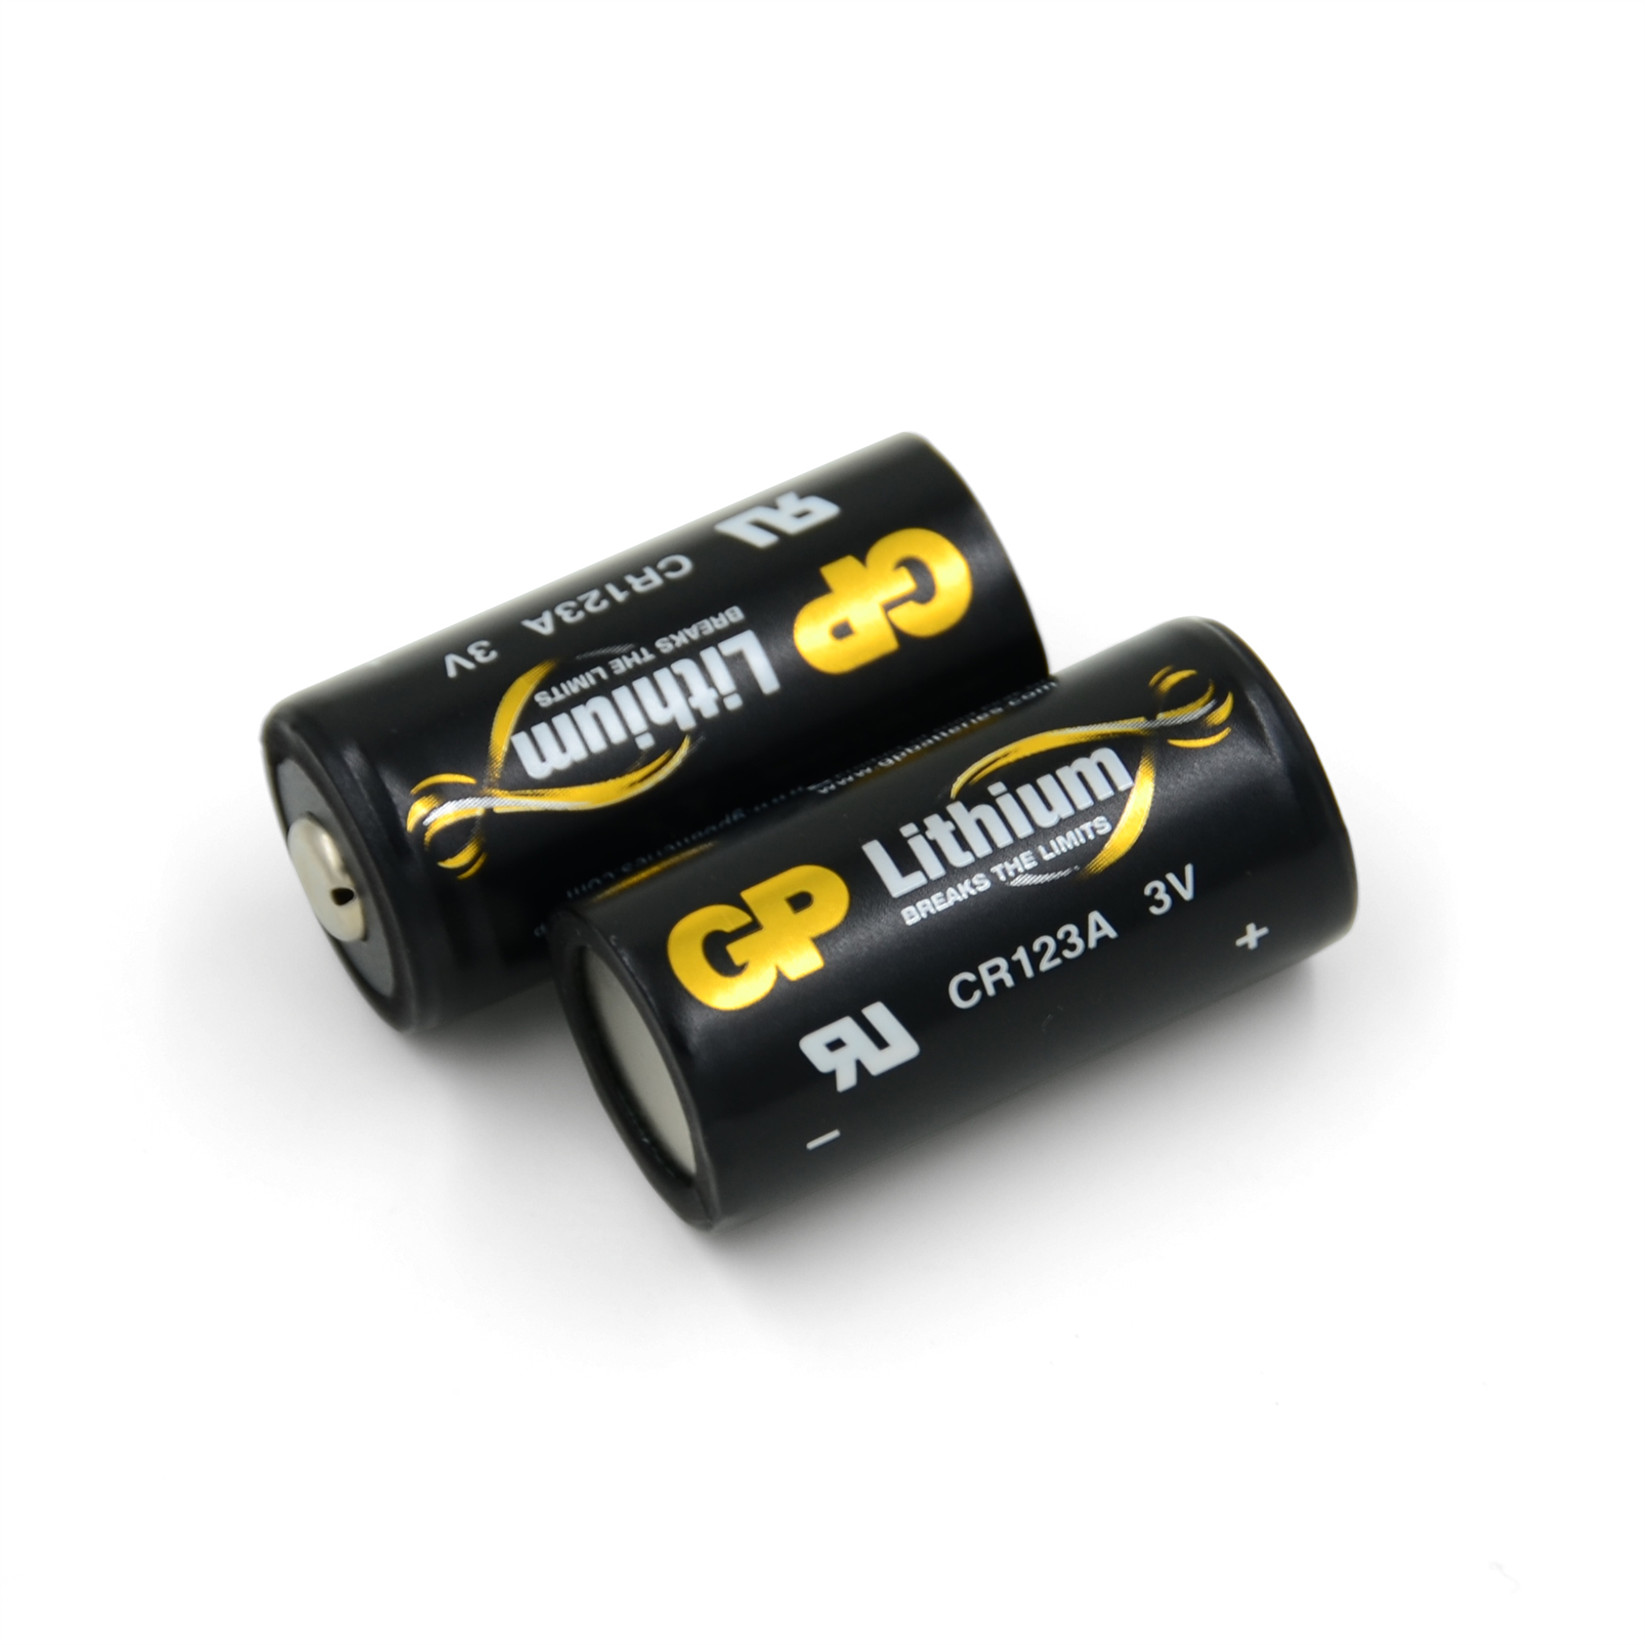 cr123a battery used for